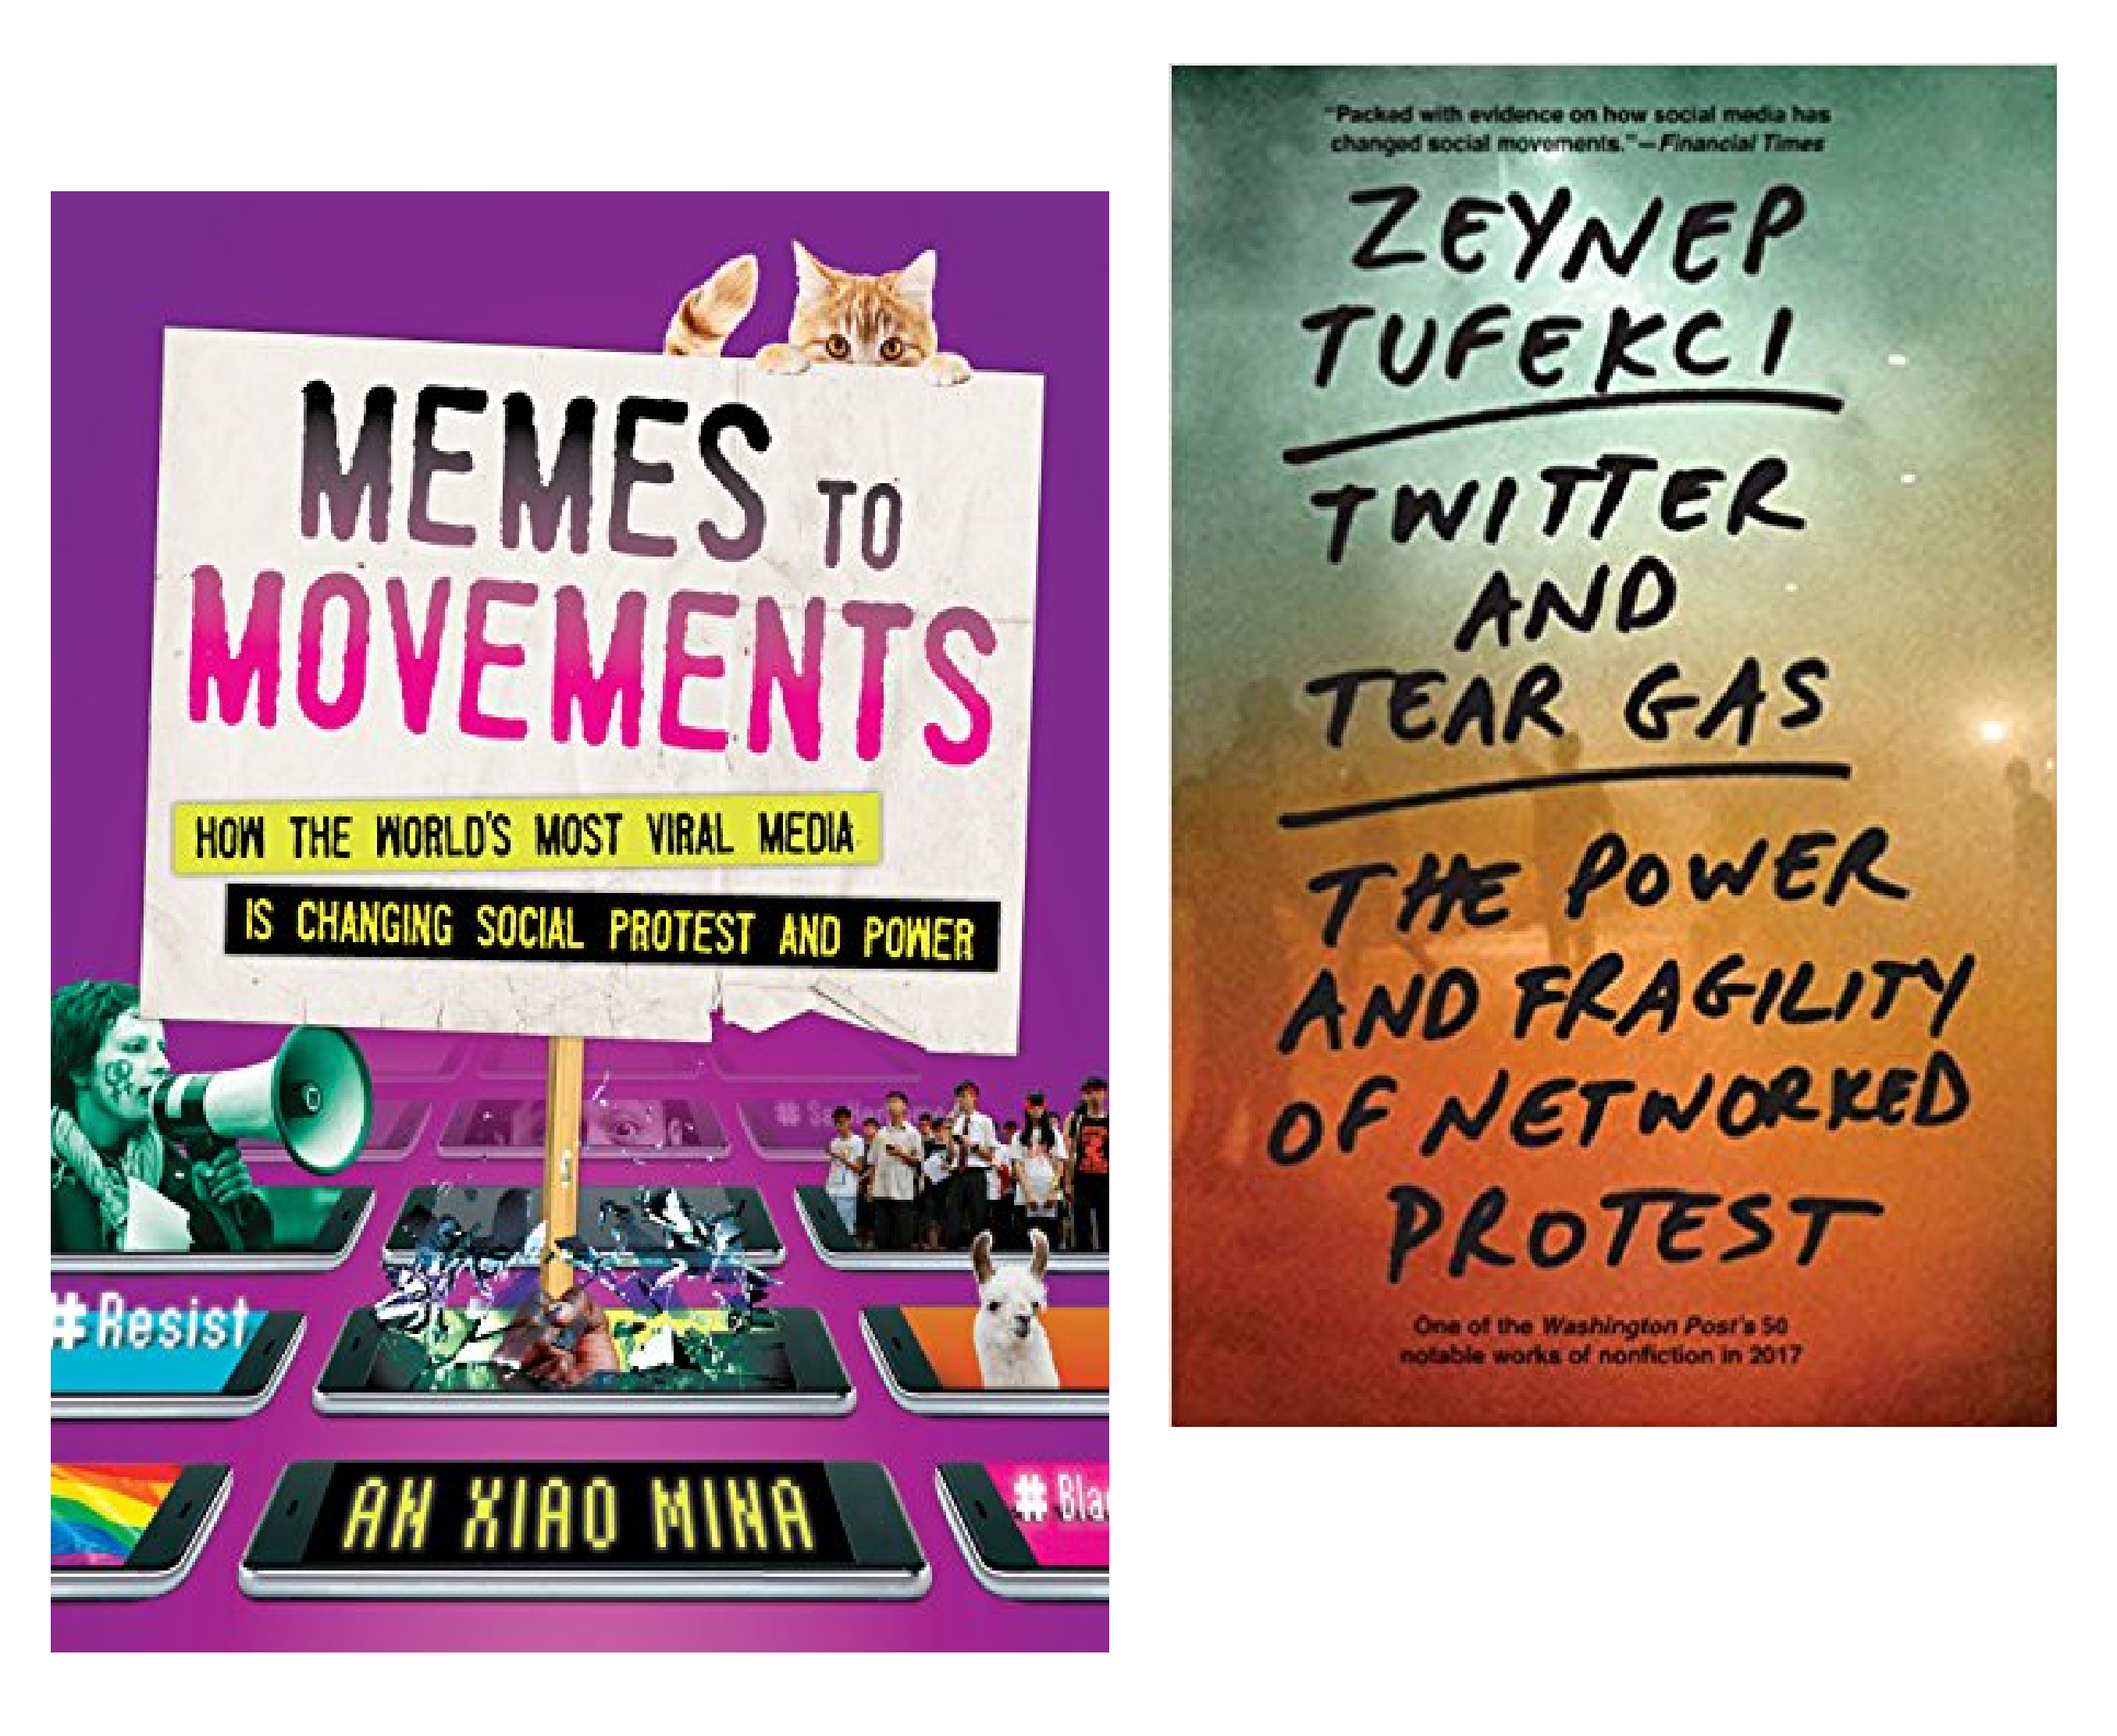 Memes to Movements Cover Image, written by An Xiao Mina (2019) and Twitter and Tear Gas: The Power and Fragility of Networked Protest by Zeynep Tufekci (2018)